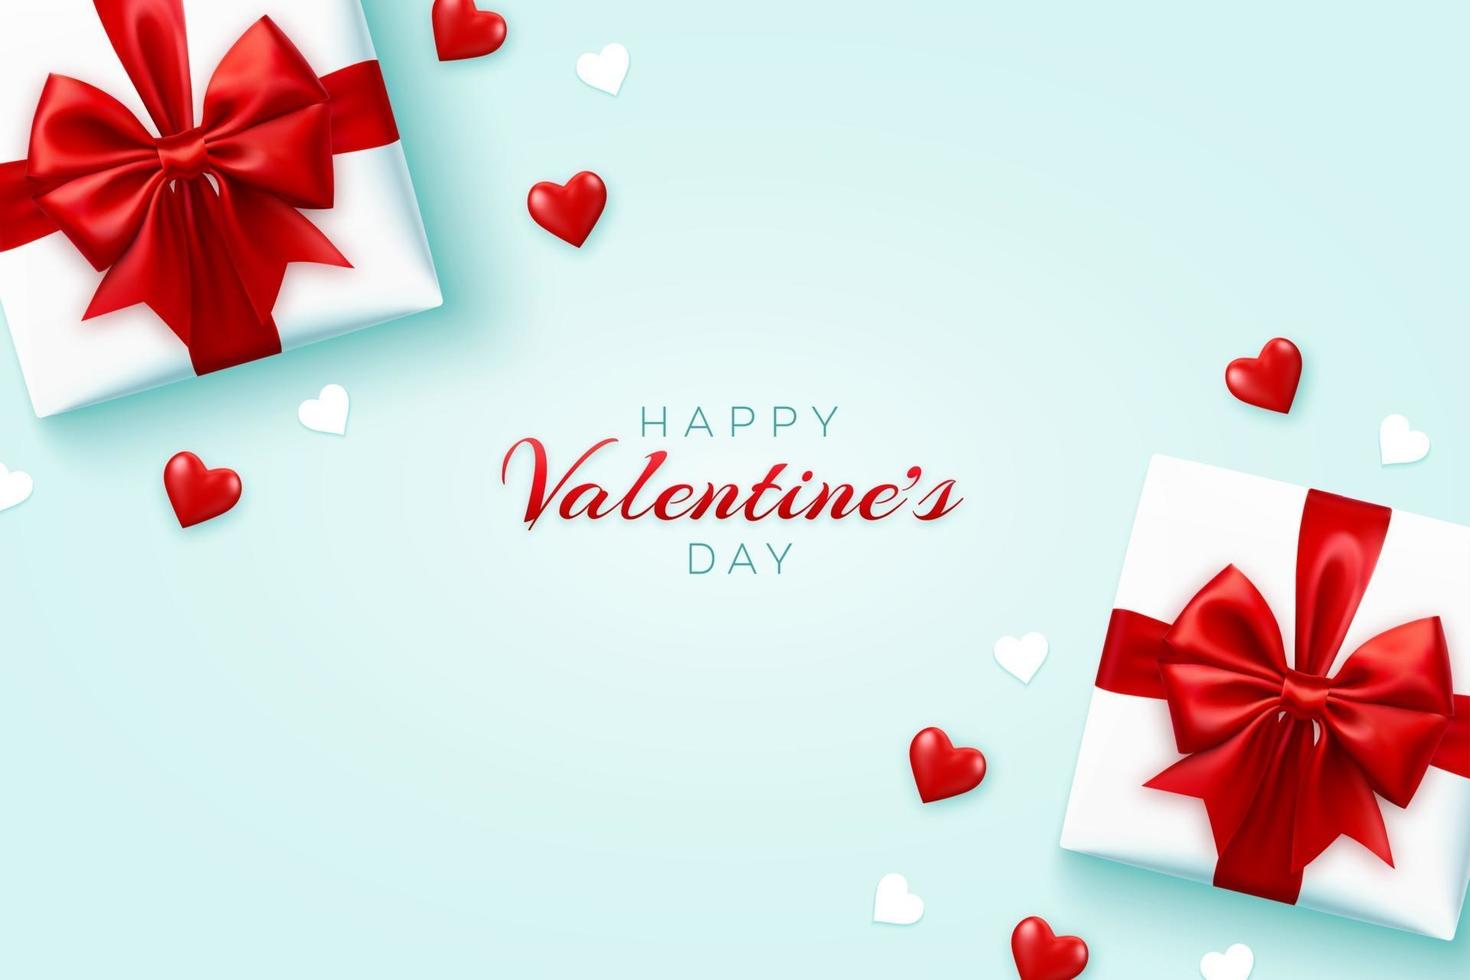 Happy Valentine's Day banner. Realistic gift boxes with red bow, and shining red 3d balloons hearts and white paper hearts on blue background. Flat lay, top view, copy space. vector